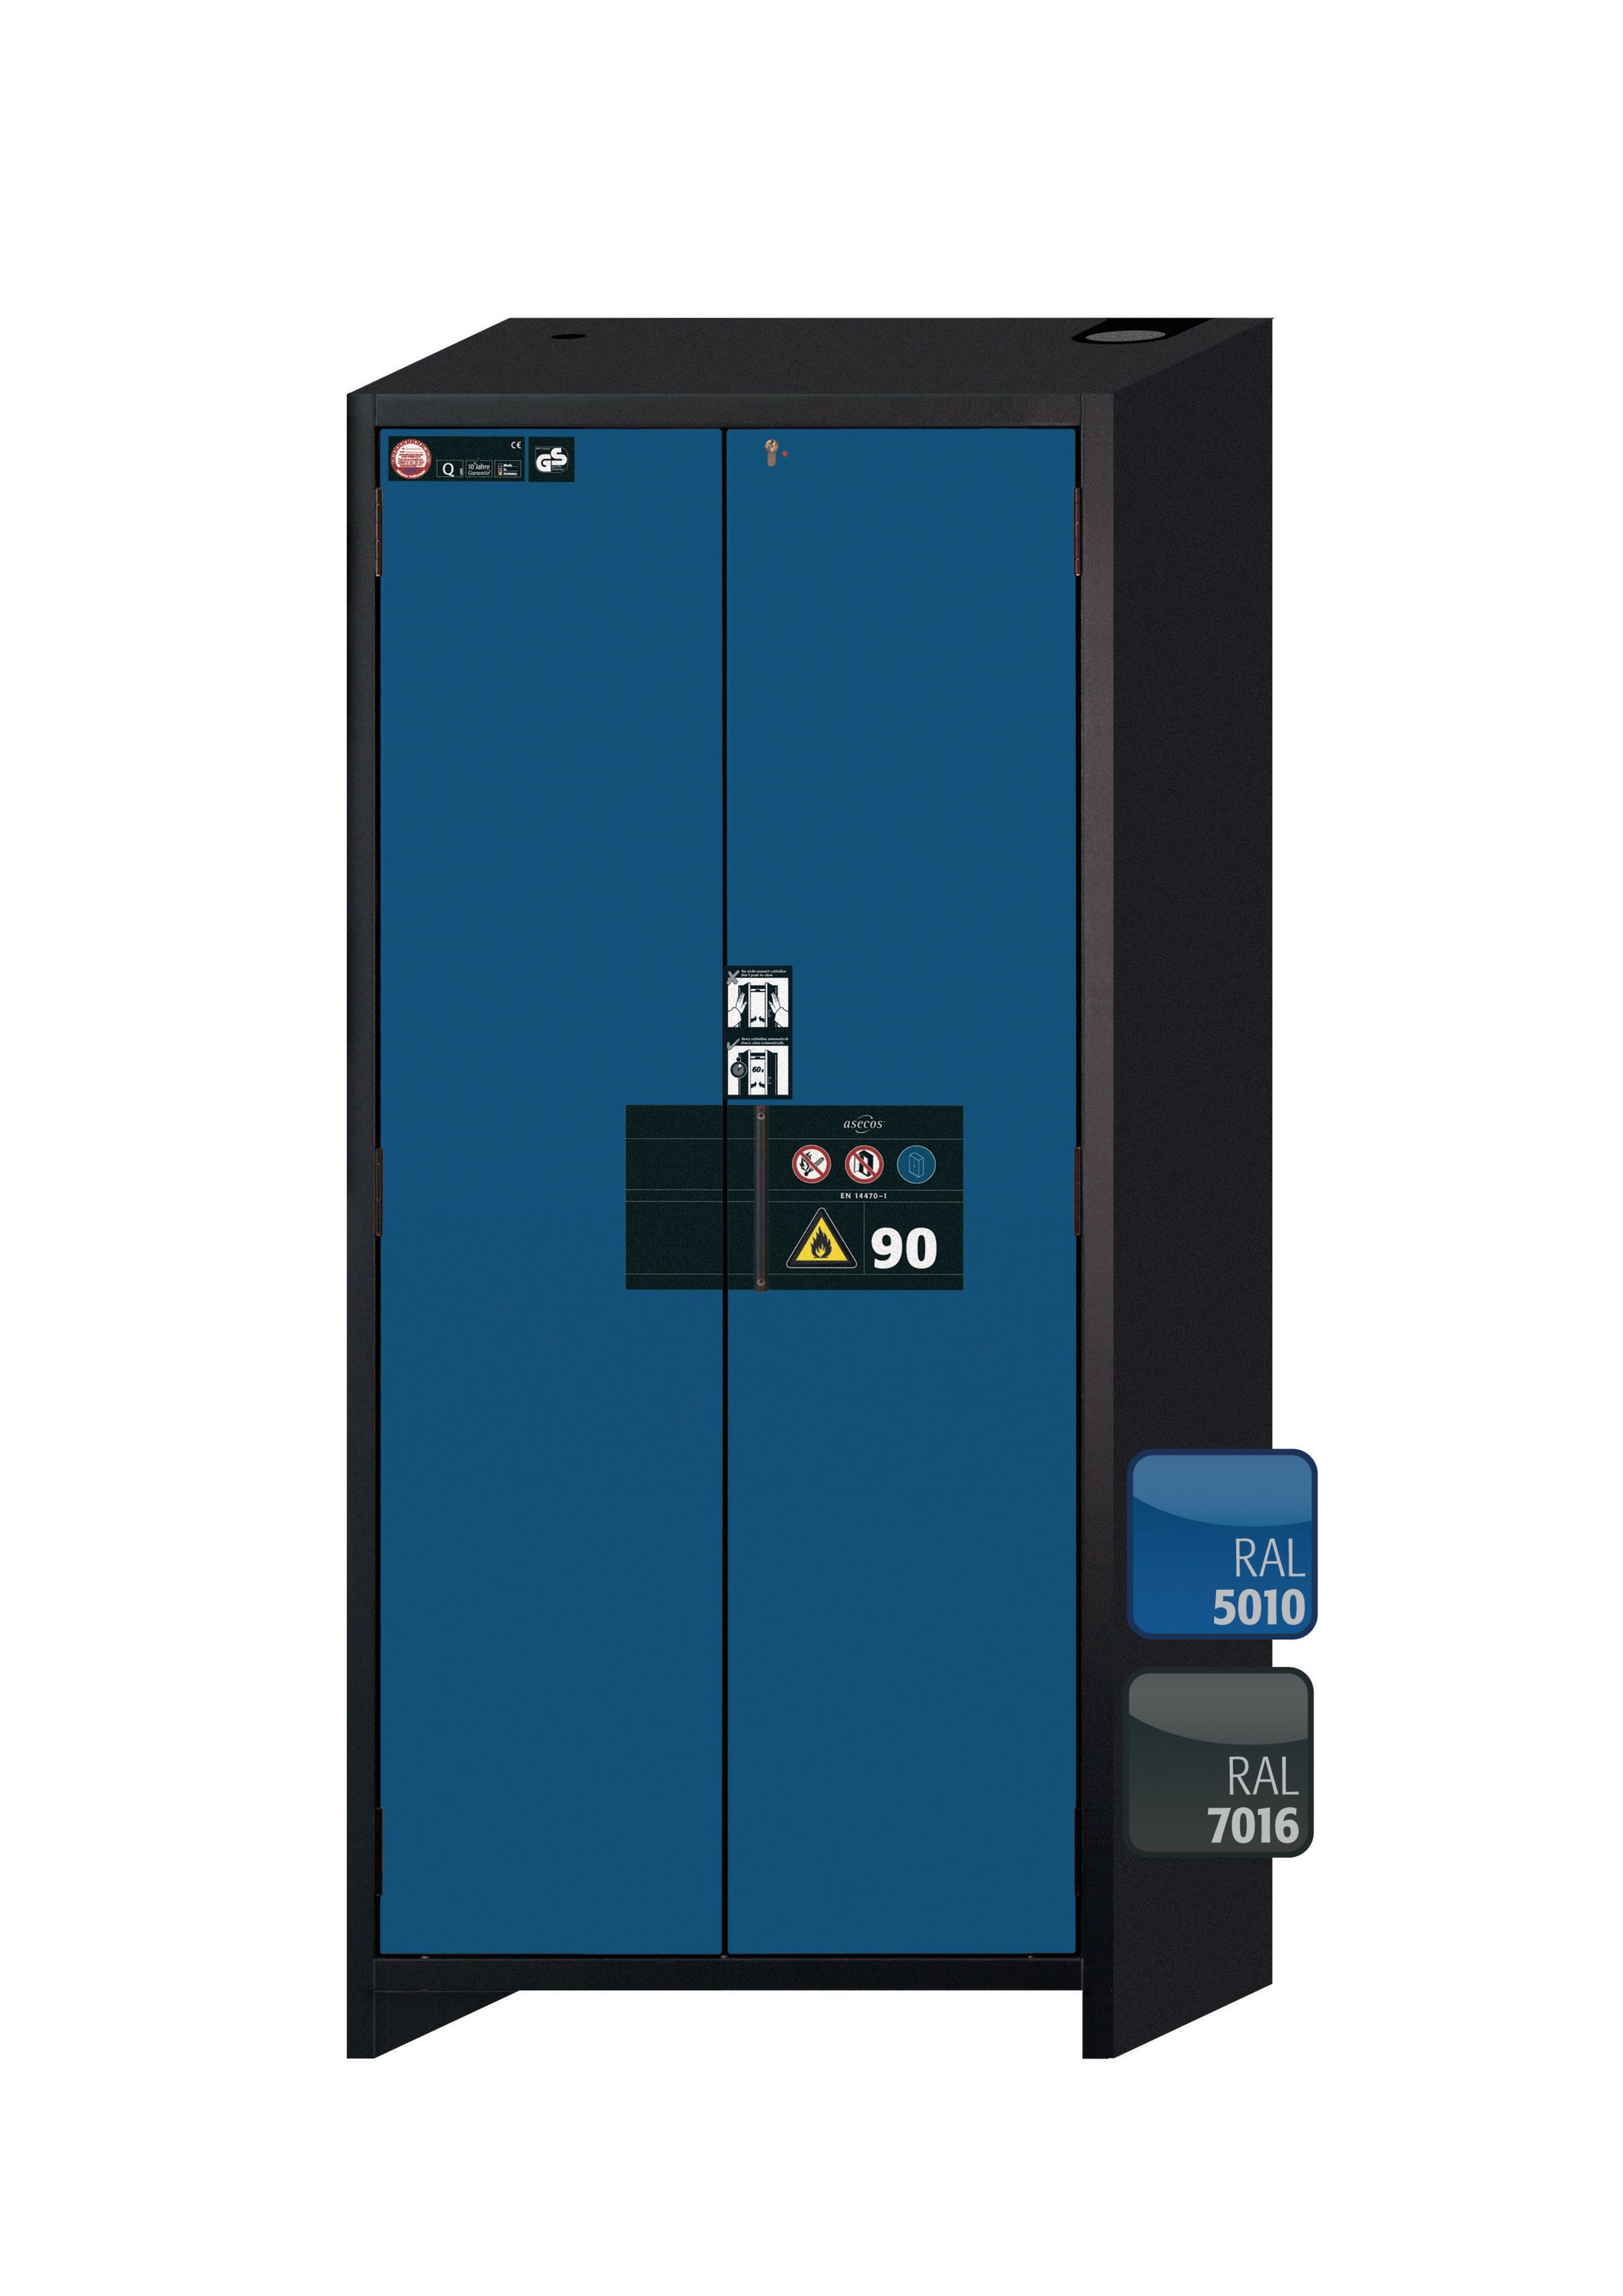 Type 90 safety storage cabinet Q-PEGASUS-90 model Q90.195.090.WDAC in gentian blue RAL 5010 with 5x drawer (standard) (sheet steel),